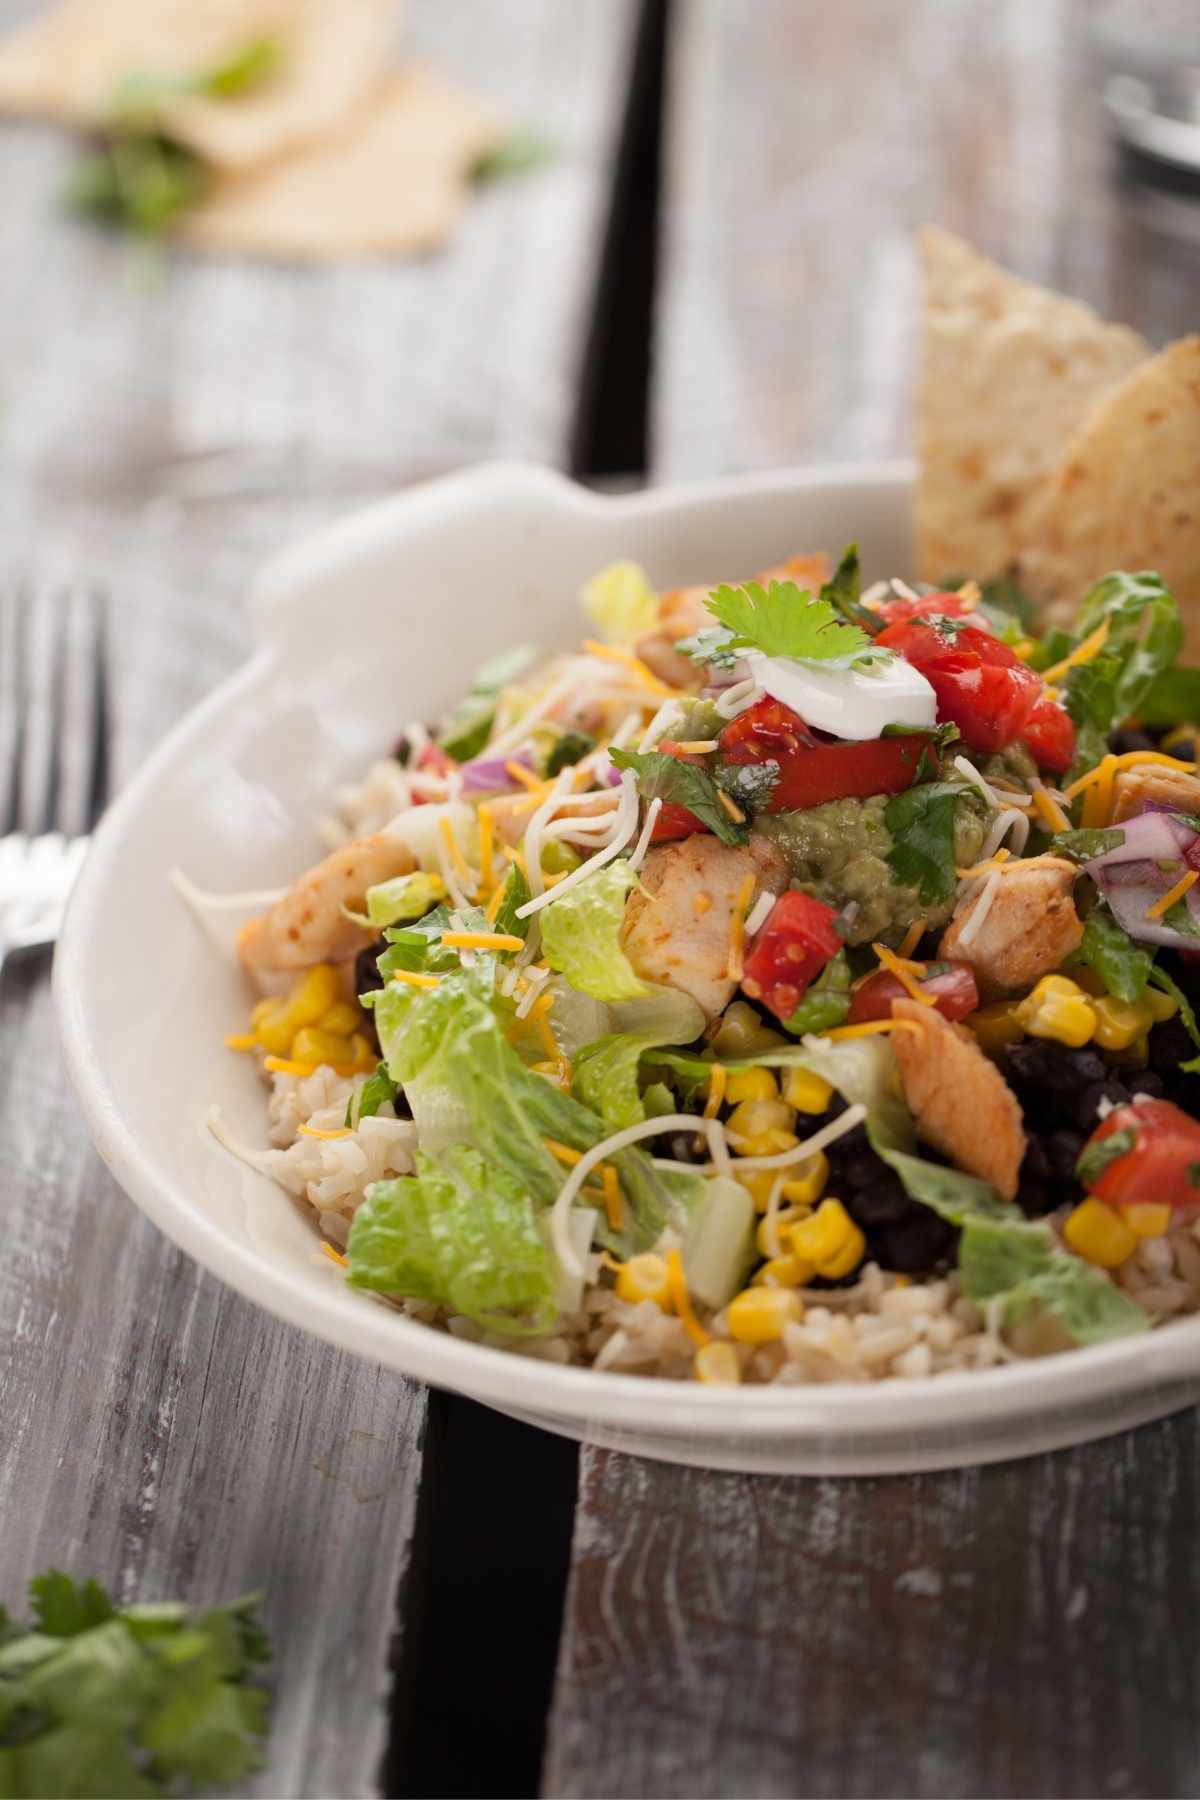 If you’re a fan of the bowls at Chipotle, you know they’re delicious and the portions are generous! To enjoy the leftovers, you want to ensure they’re properly stored.